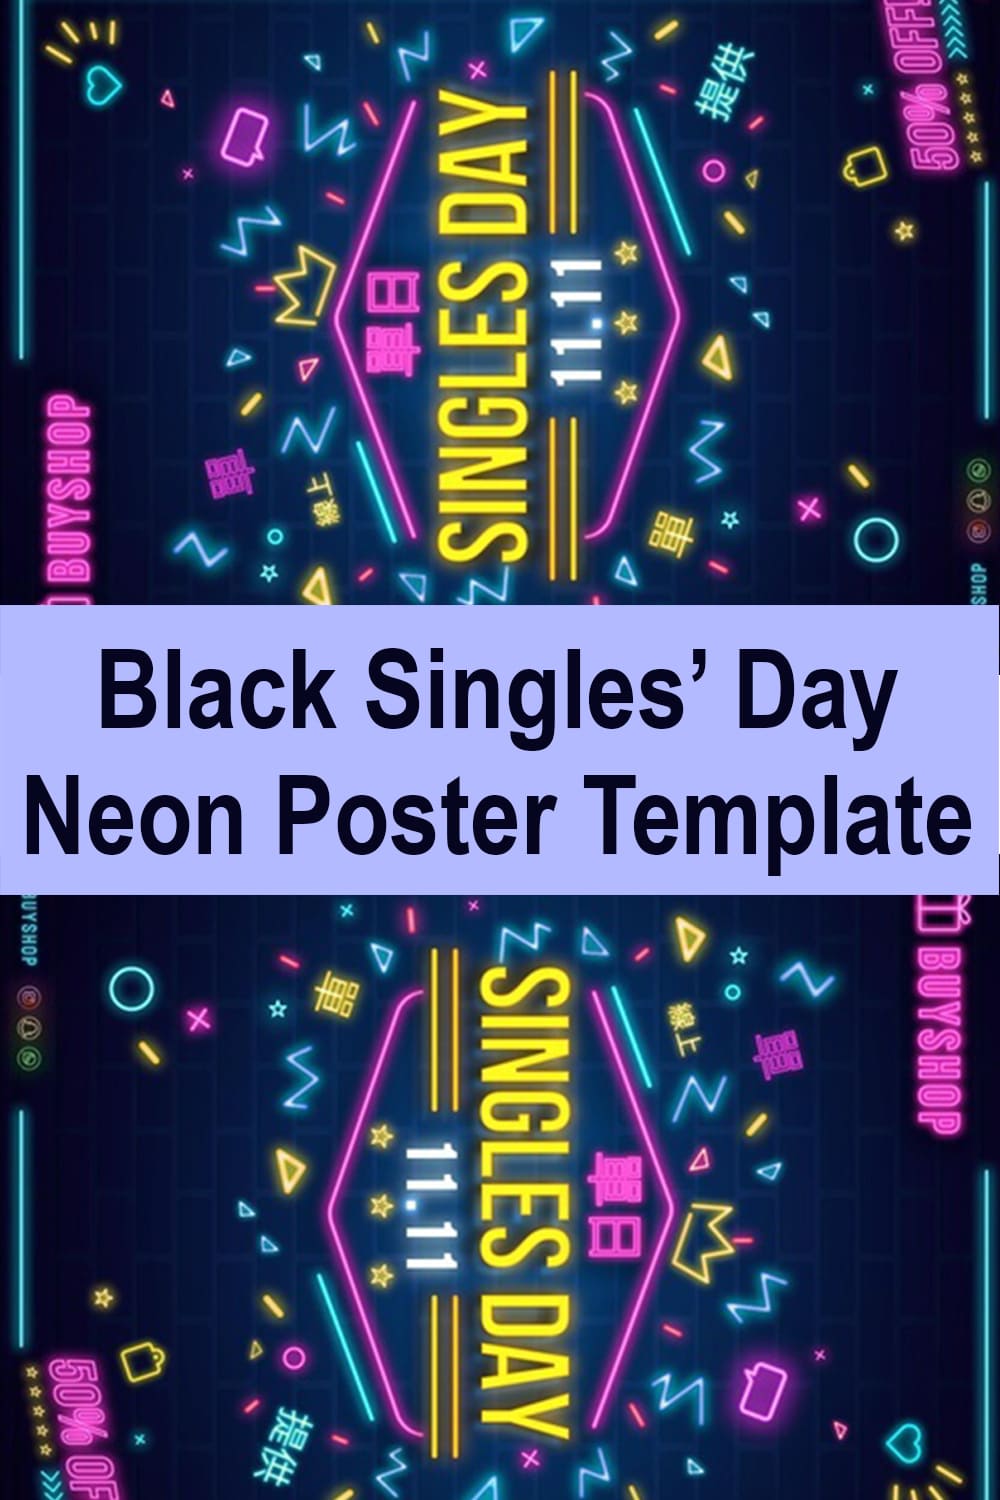 Black Singles' Day Neon Poster Template.